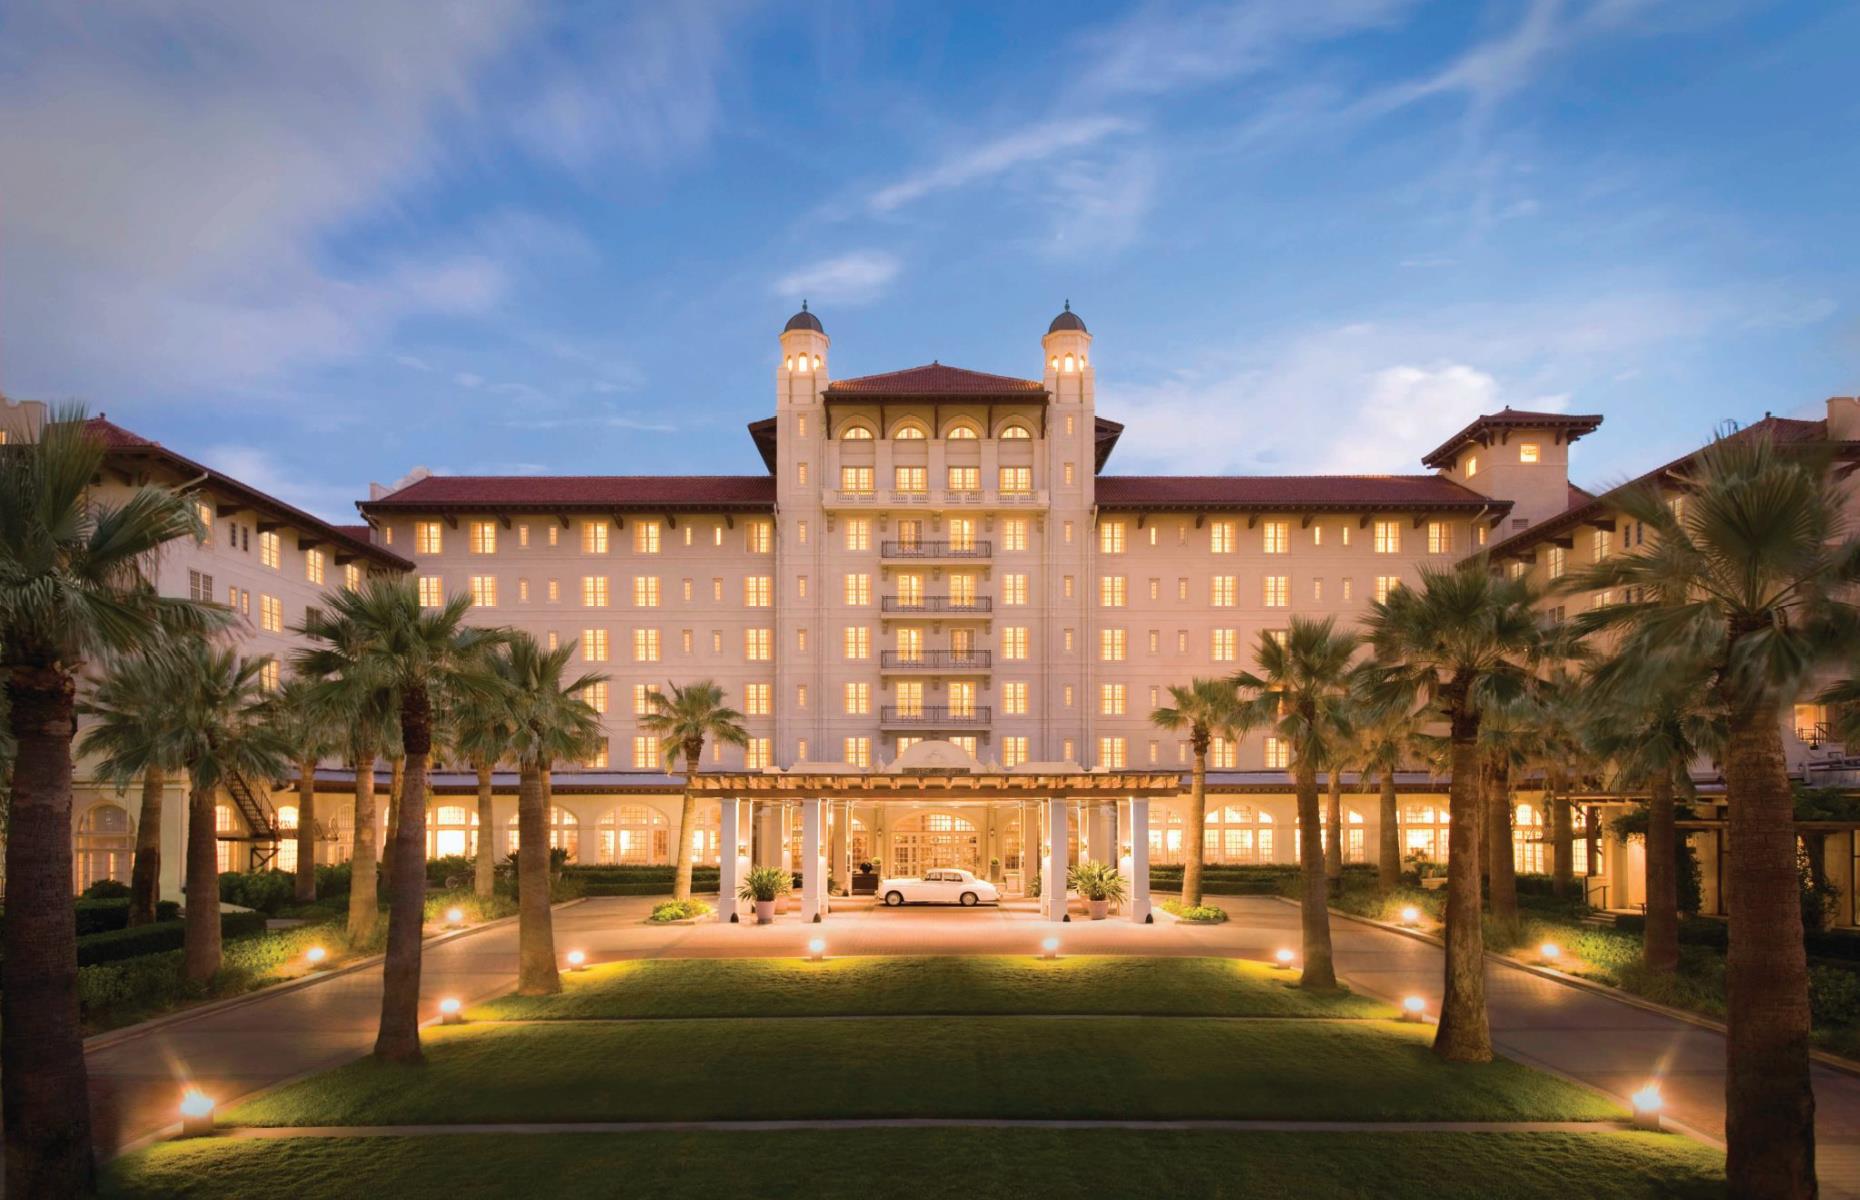 <p>Texas isn’t exactly known for its beach resorts, but the island city of Galveston in the Gulf of Mexico is a top destination for sunseekers. <a href="https://www.hotelgalvez.com">Hotel Galvez</a> has been one of Galveston’s most sought-after resorts for over 100 years and the grand old building is a sight to behold both inside and out. In addition to taking in the beach, spa and on-site restaurants, guests can explore the city of Galveston which is home to a historic pleasure pier and other attractions.</p>